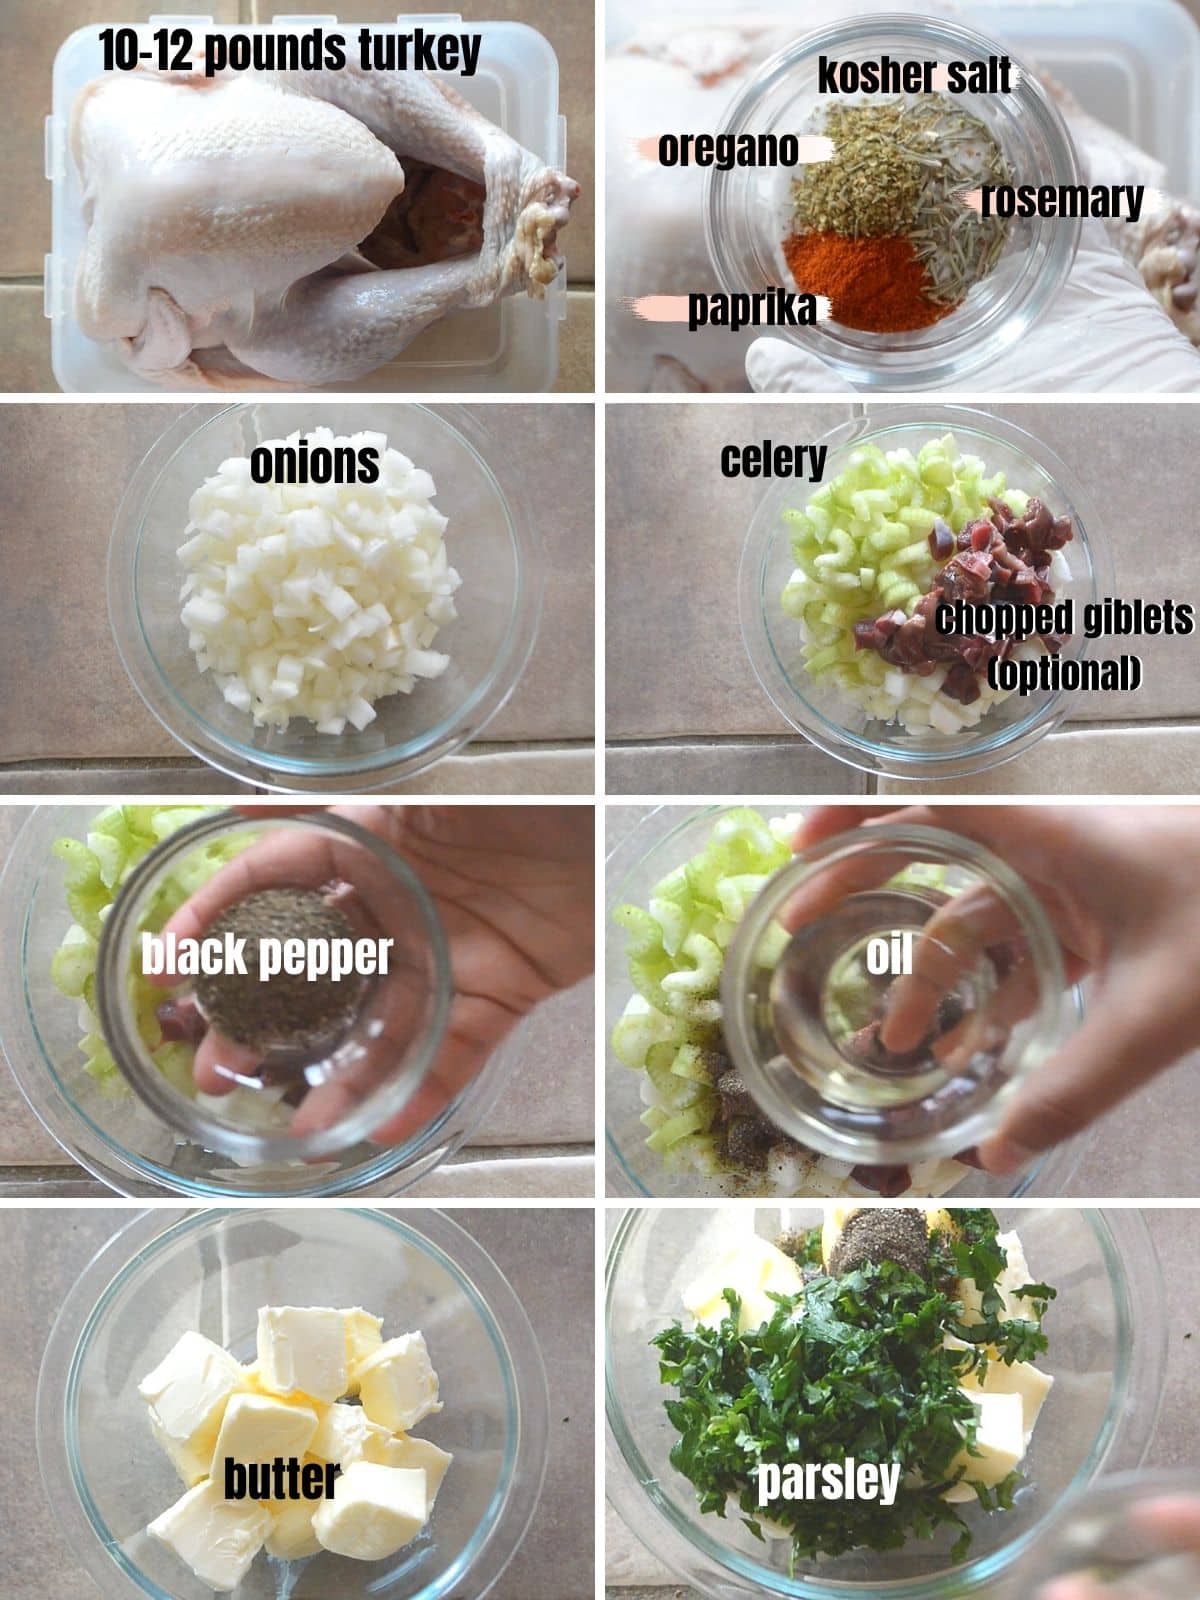 A collage of 8 photos showing Ingredients to make stuffed roasted turkey.